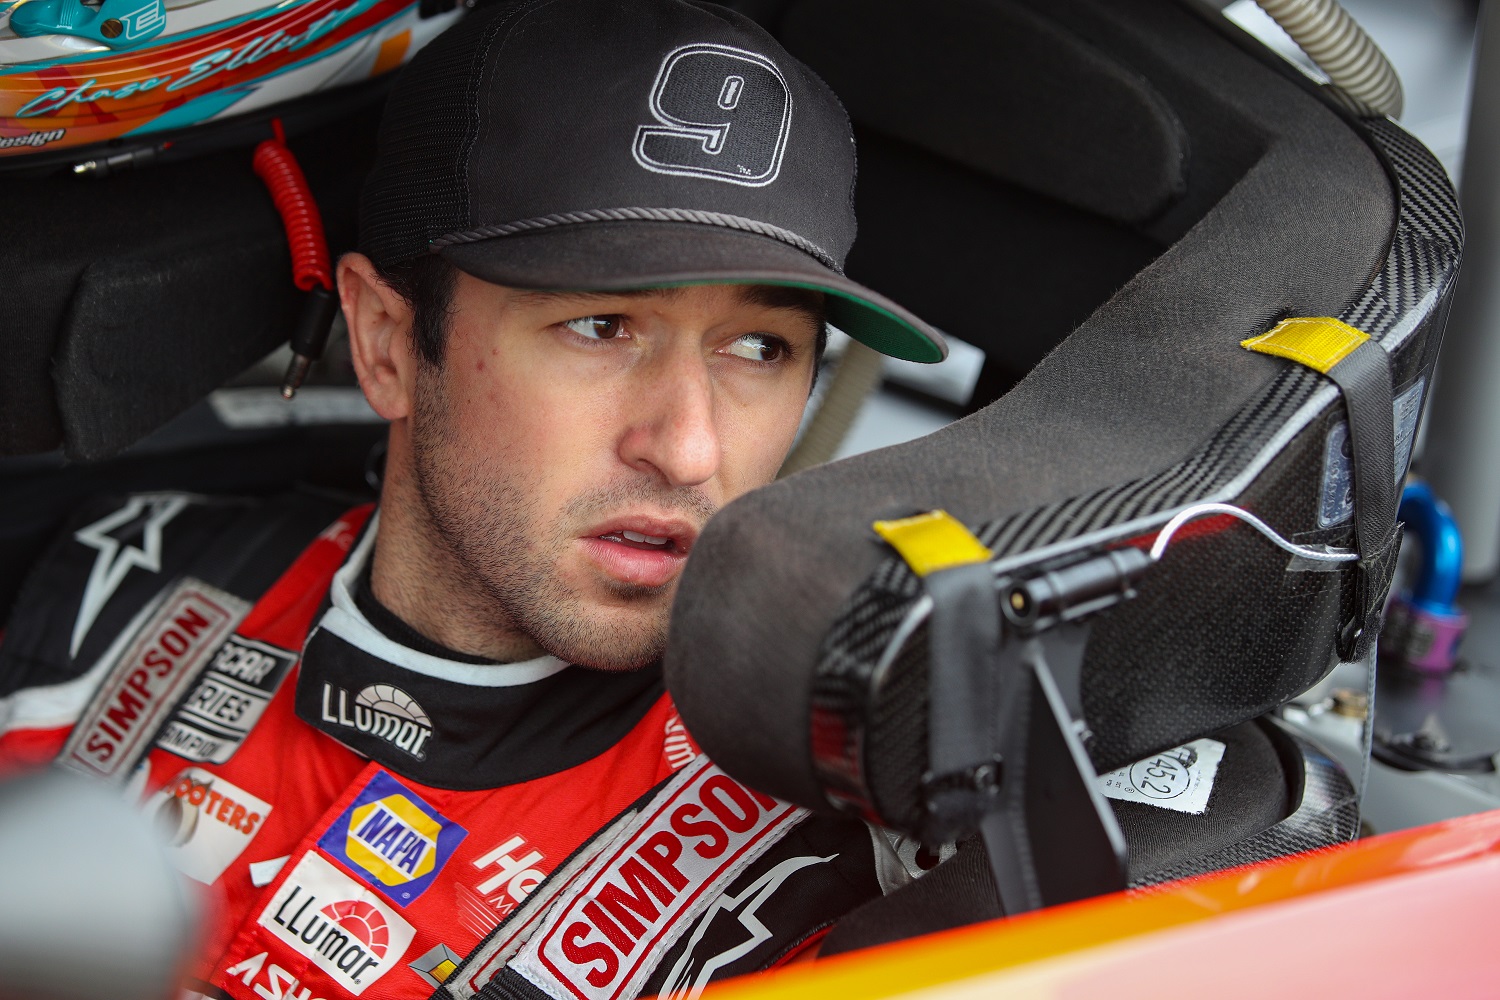 Chase Elliott sits in his car during qualifying for the NASCAR Cup Series Blue-Emu Maximum Pain Relief 400 at Martinsville Speedway on April 8, 2022.